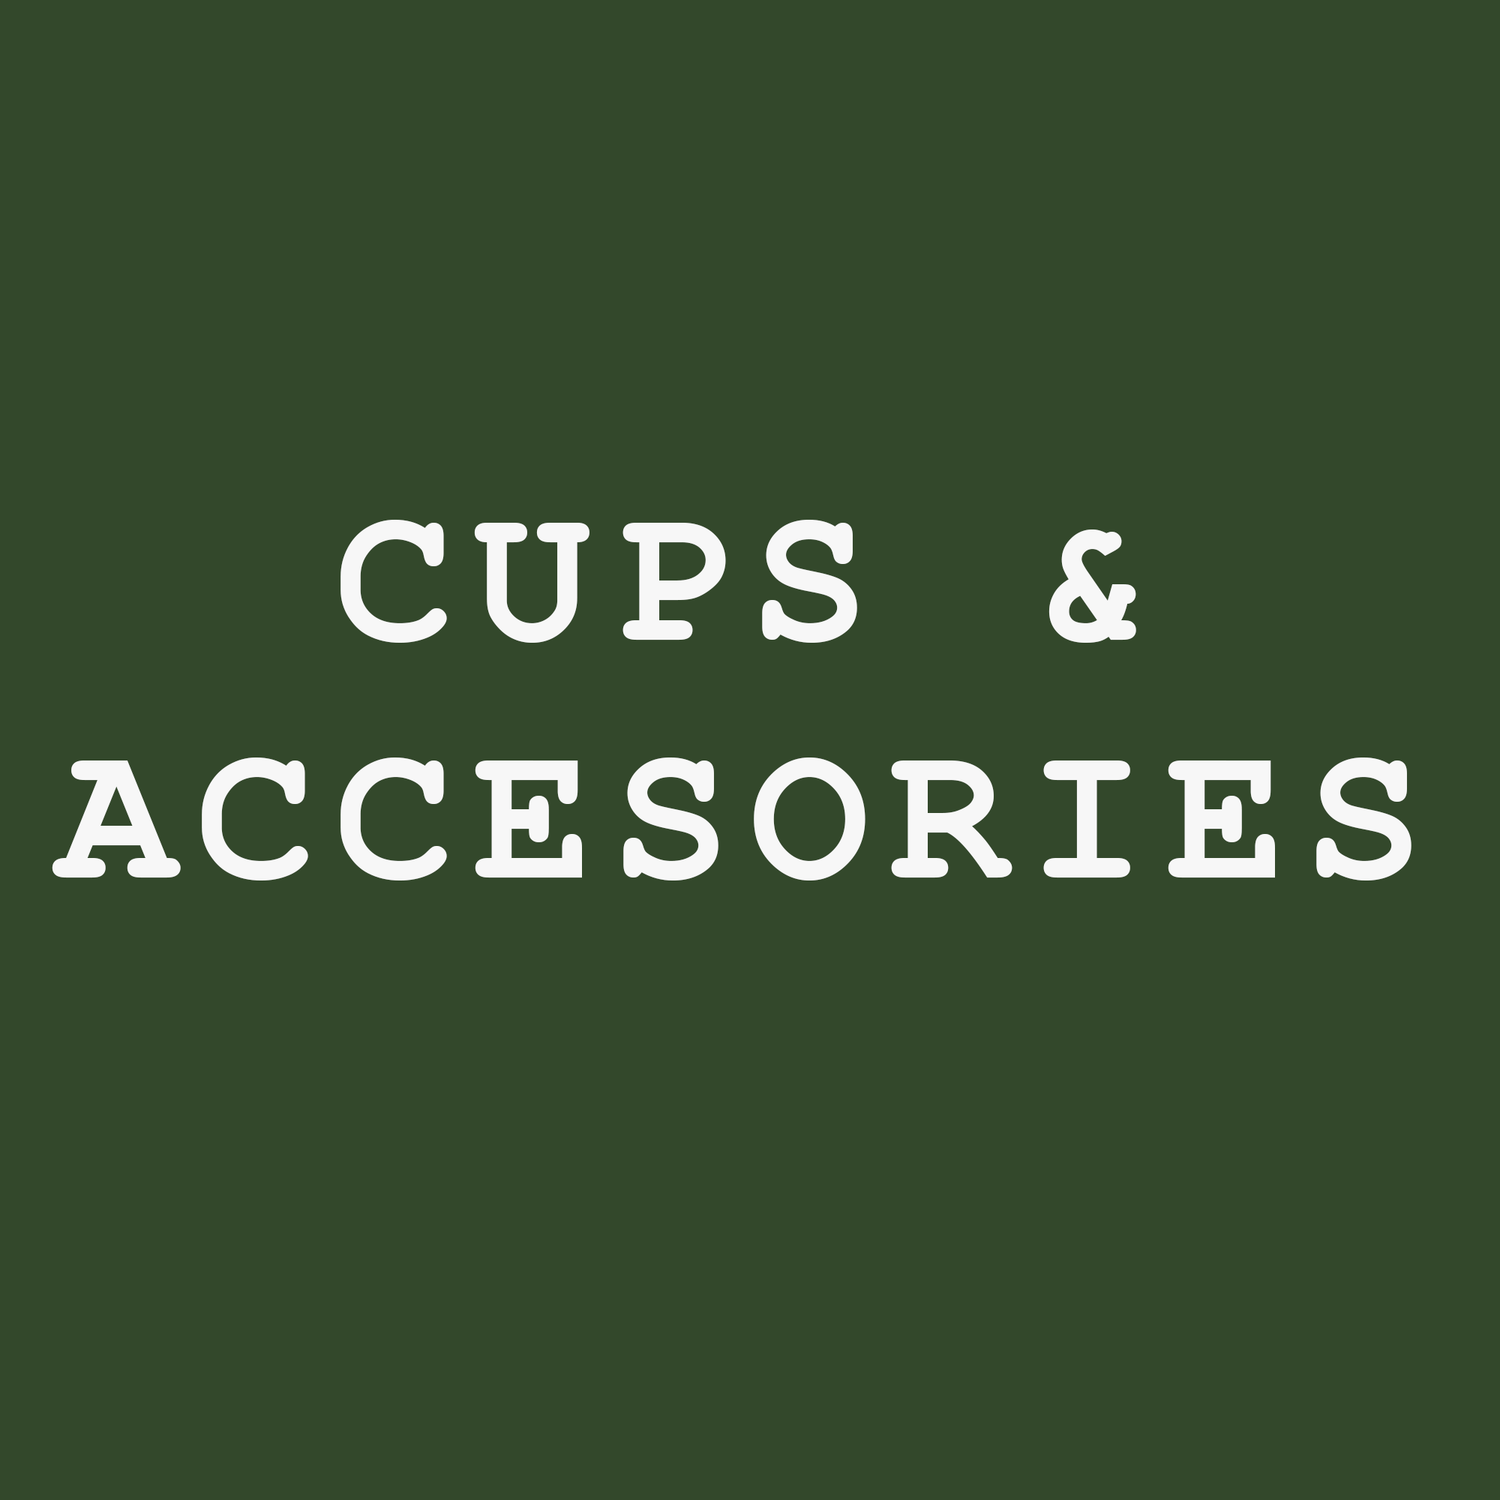 All Cups & Accessories